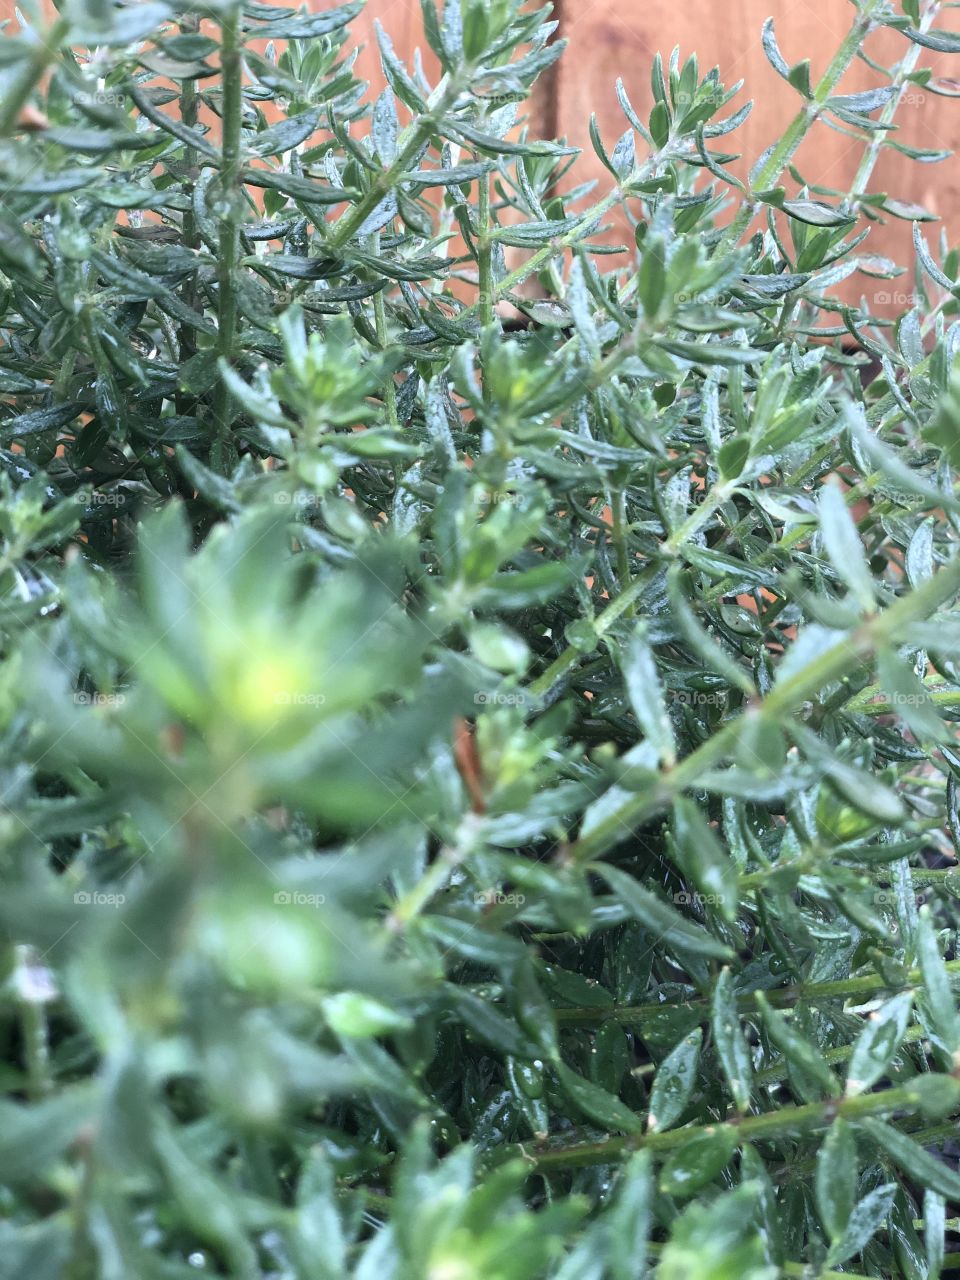 With a blurred foreground, this photo of a plant is more focused on the background. The calm green in different shades is visible all throughout this photo.